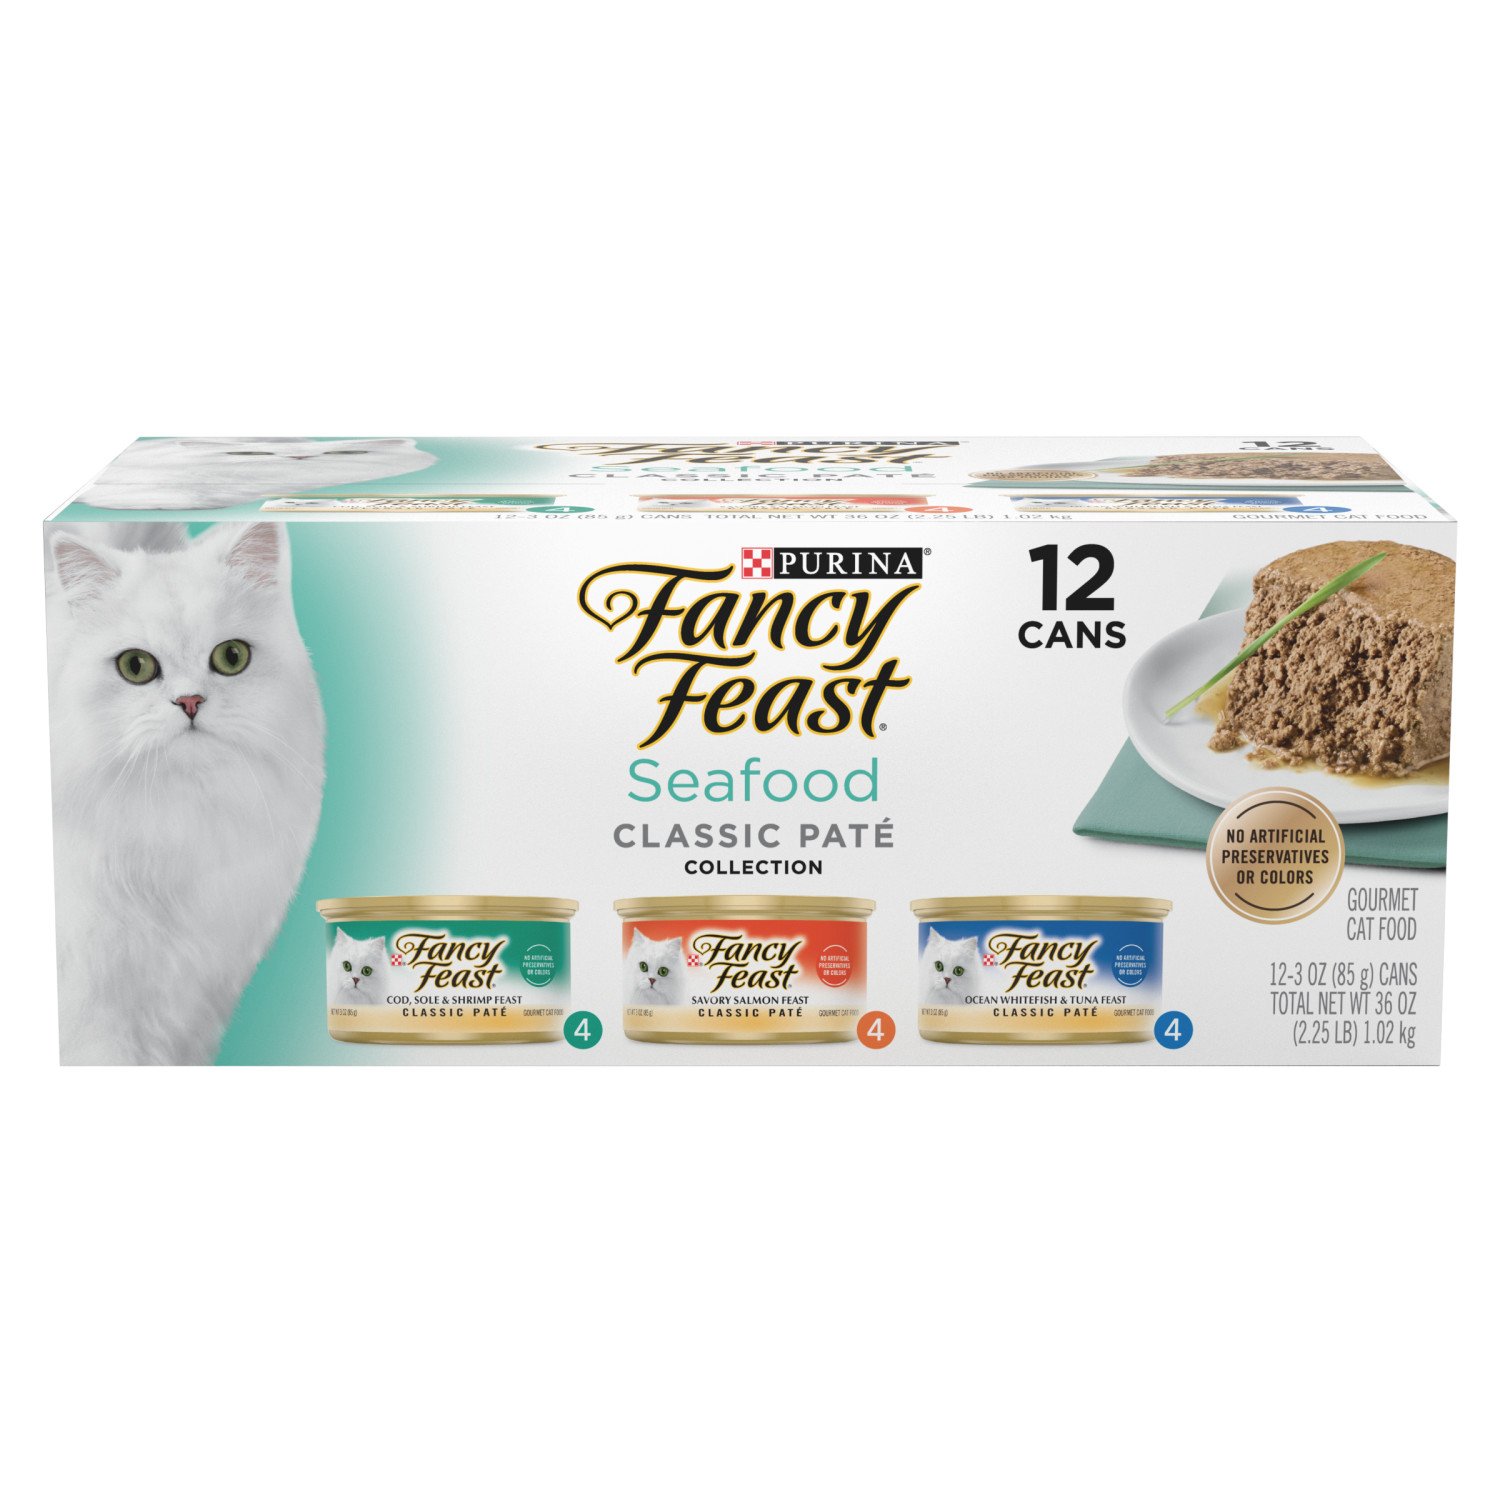 Purina Fancy Feast Gourmet Seafood Classic Pate Wet Cat Food Variety